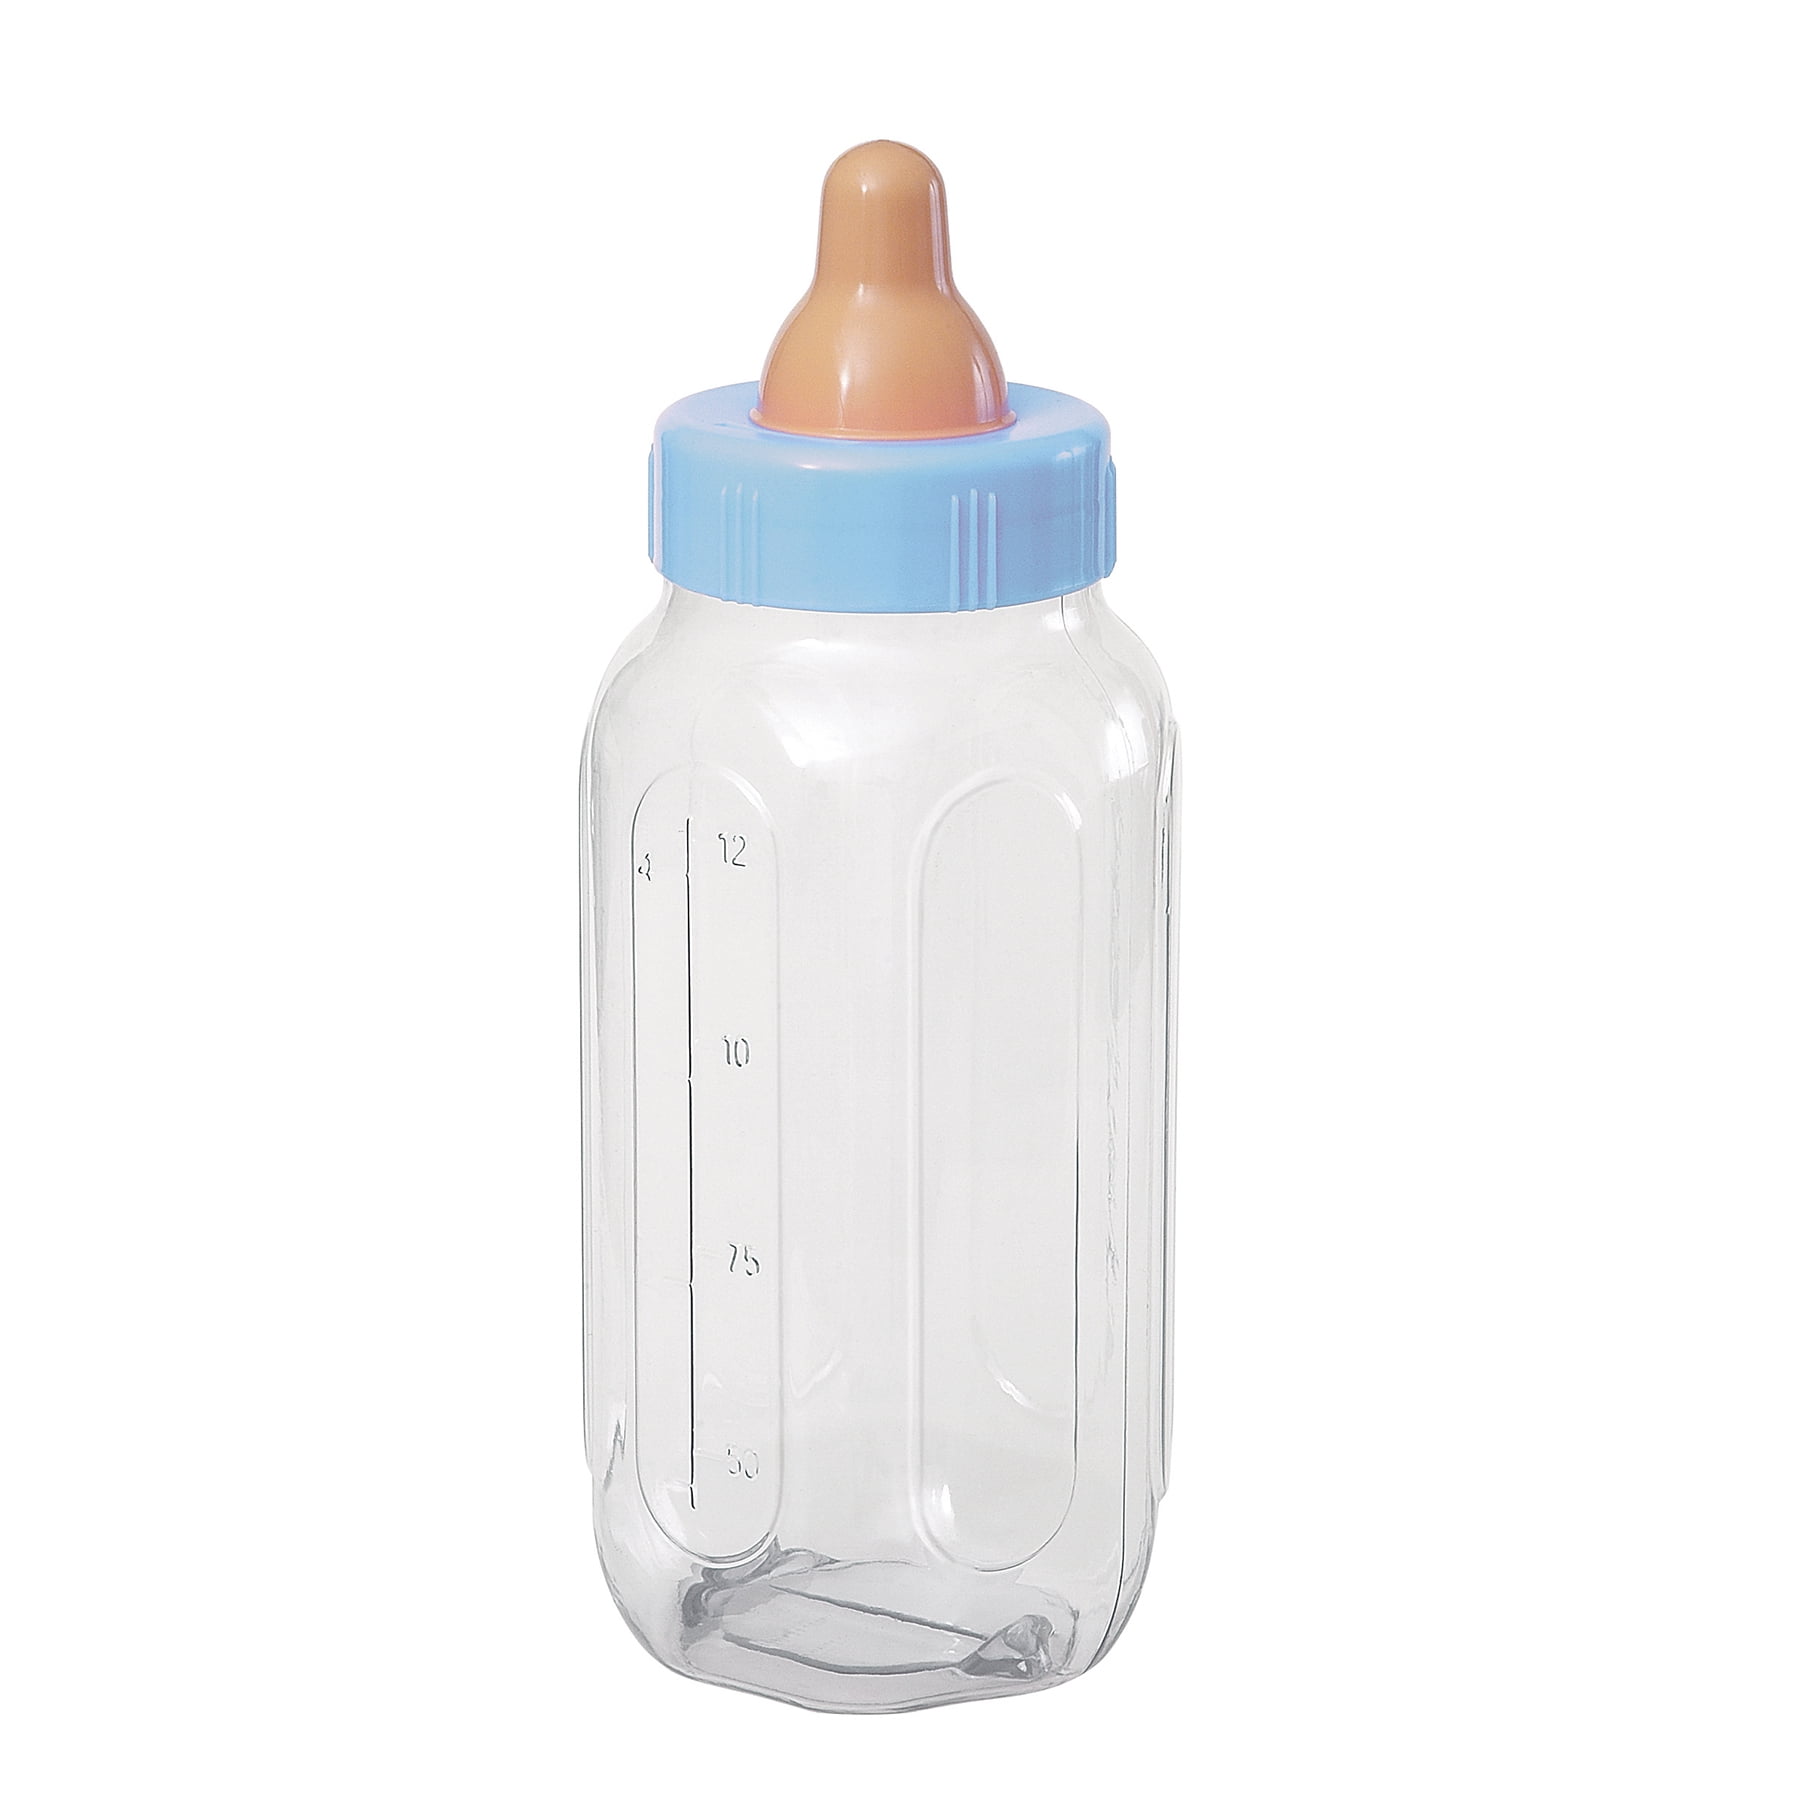 The Perfect Baby Gift! Bottle Pets Stuffed Animal and Baby Bottle Cover in One